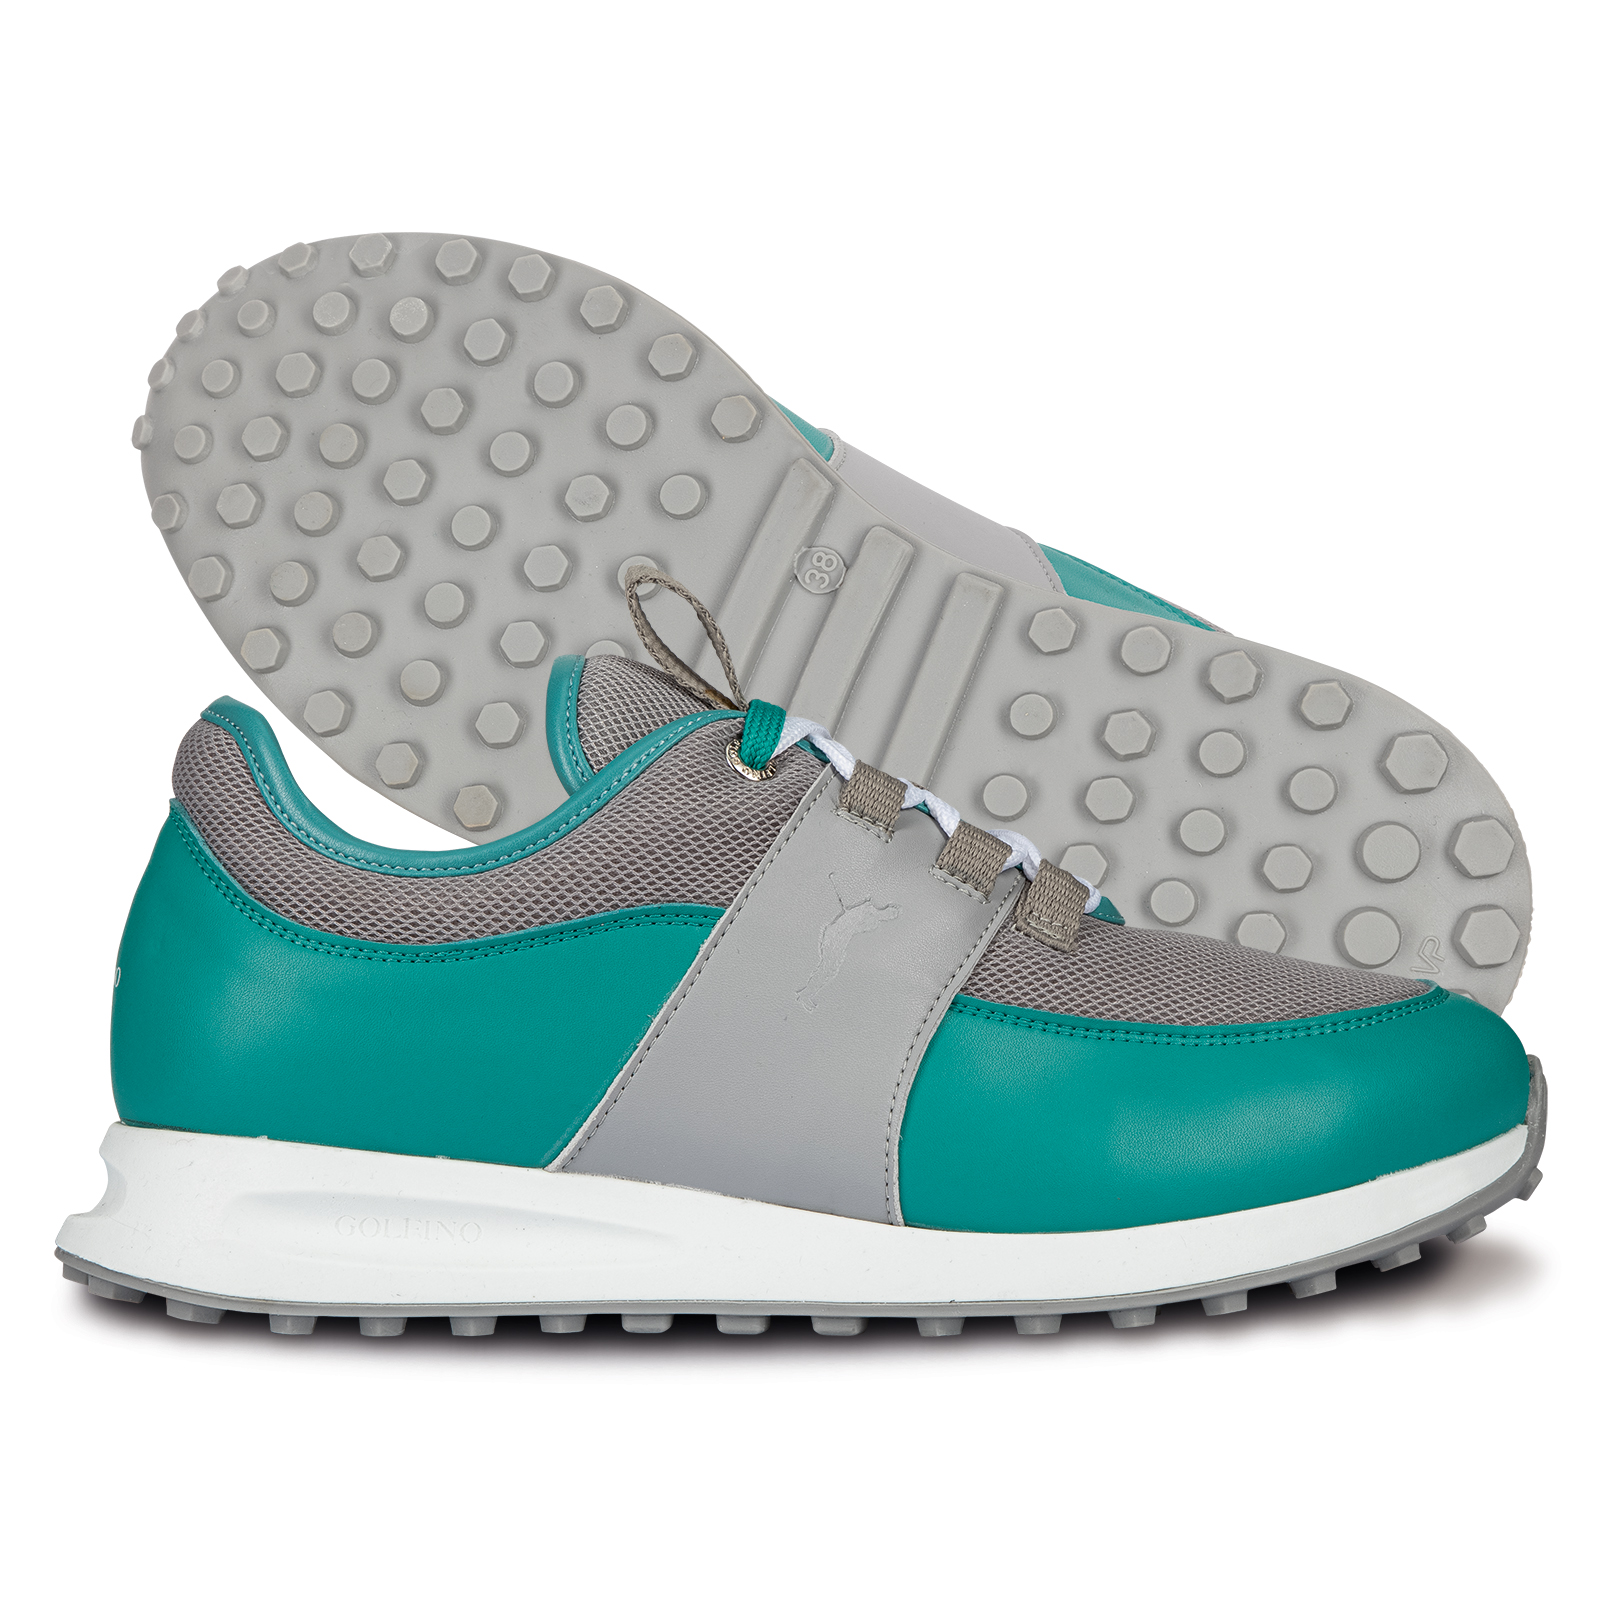 Attractive ladies golf shoes with mesh insert